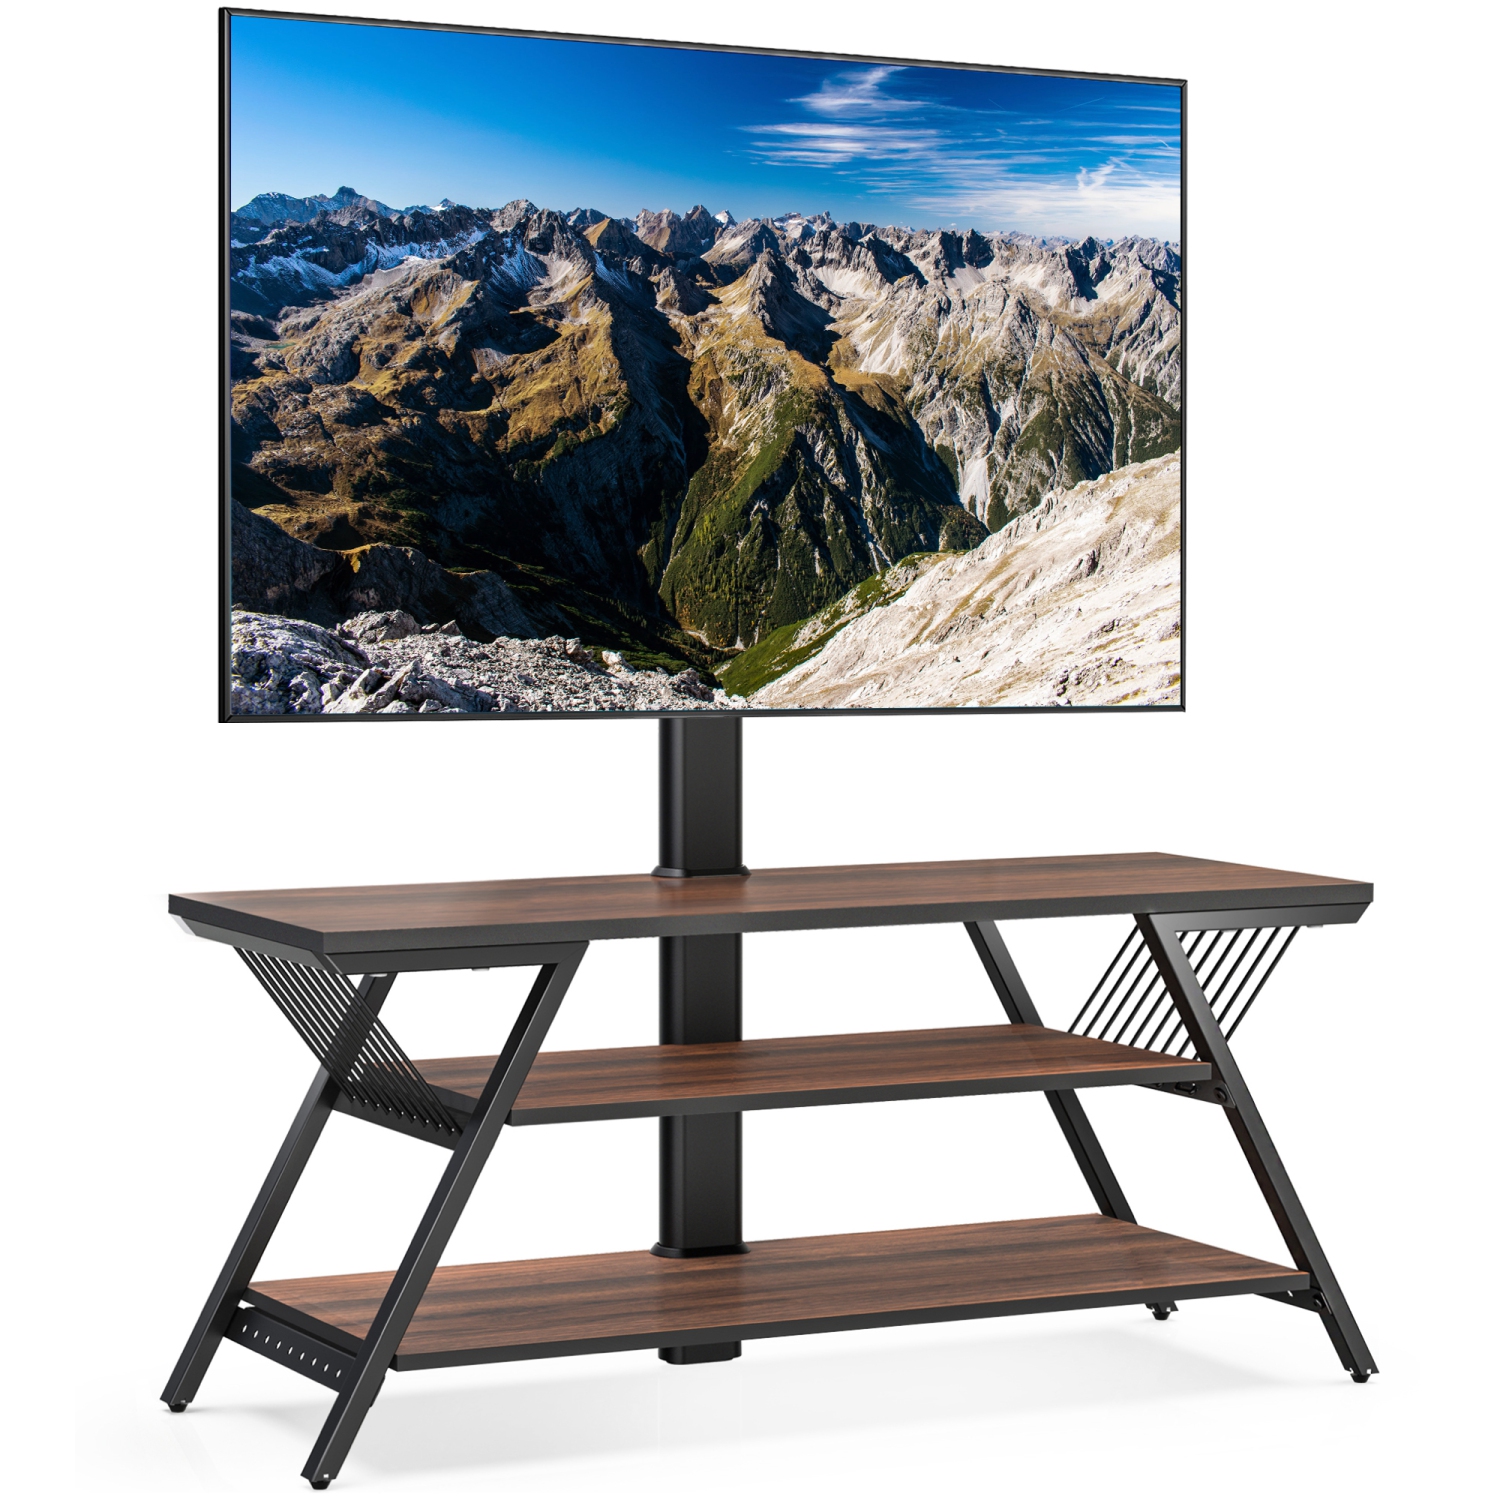 FITUEYES Floor TV Stand with Mount 3 Tier Wooden Shelves for 32 - 65 inch TV Entertainment Center Table with Swivel & Height Adjustable for LCD/LED Flat Curved Screens Max VESA 600x400mm